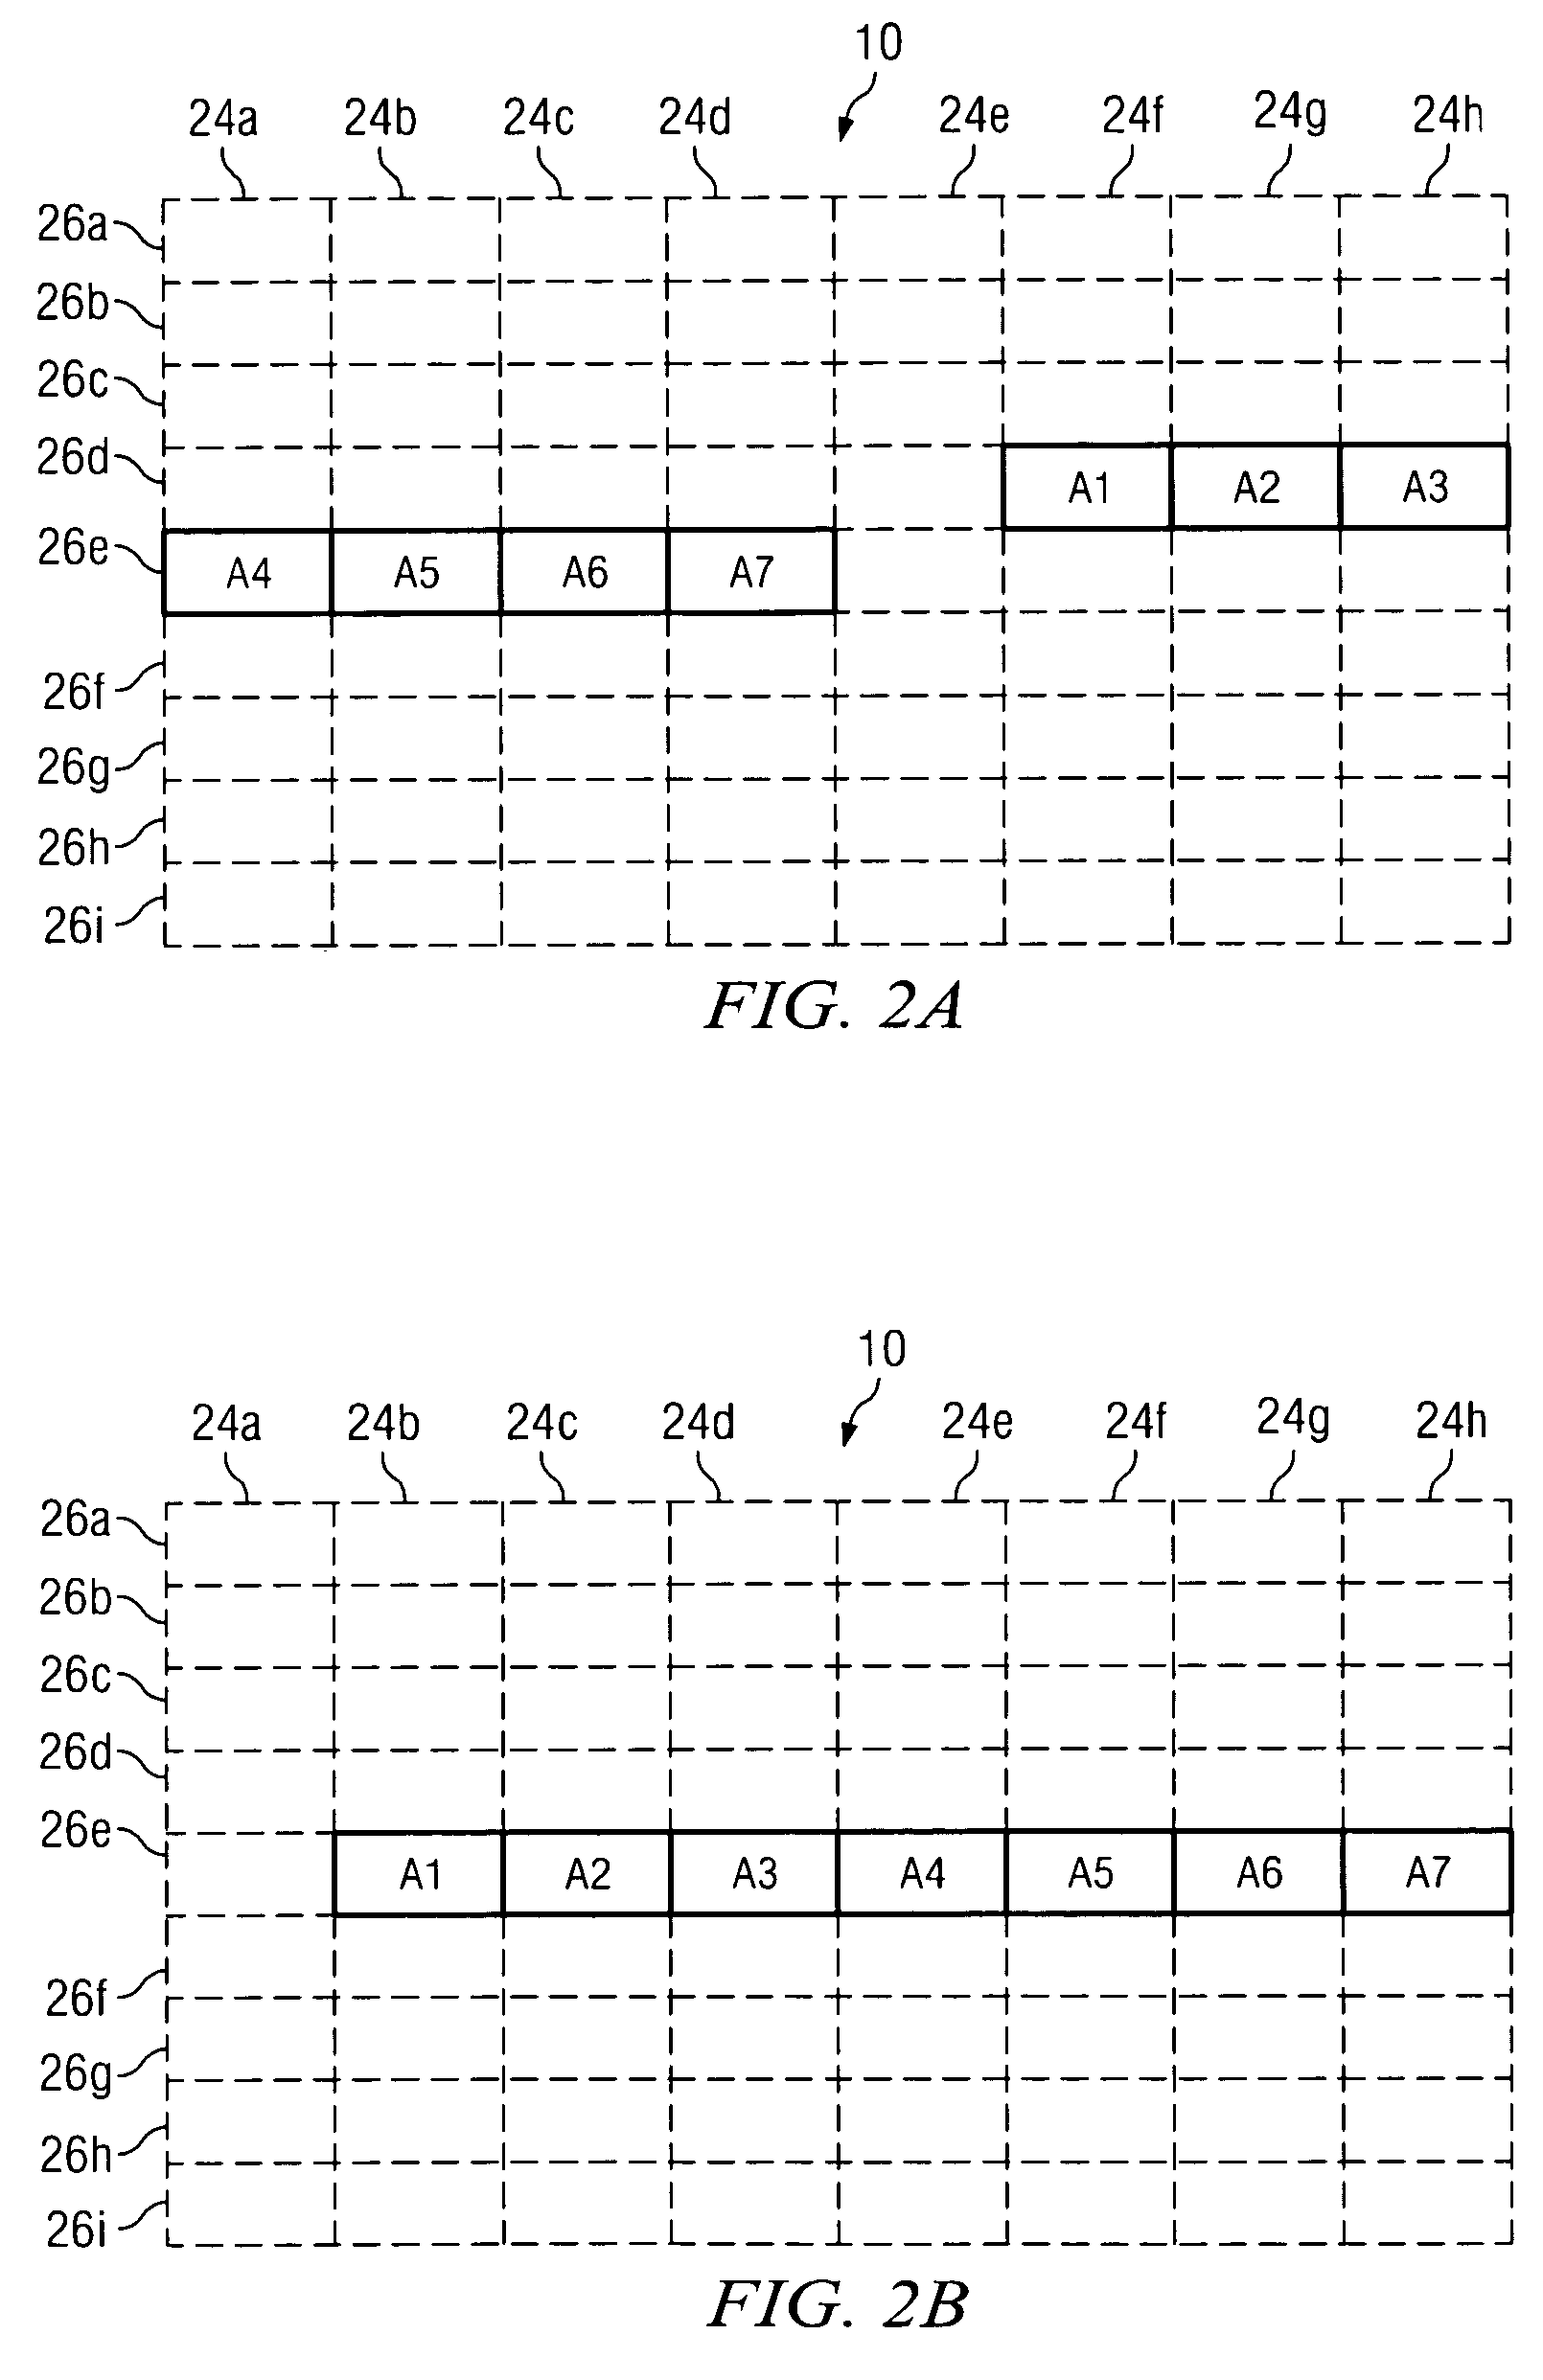 Reducing power consumption at a cache